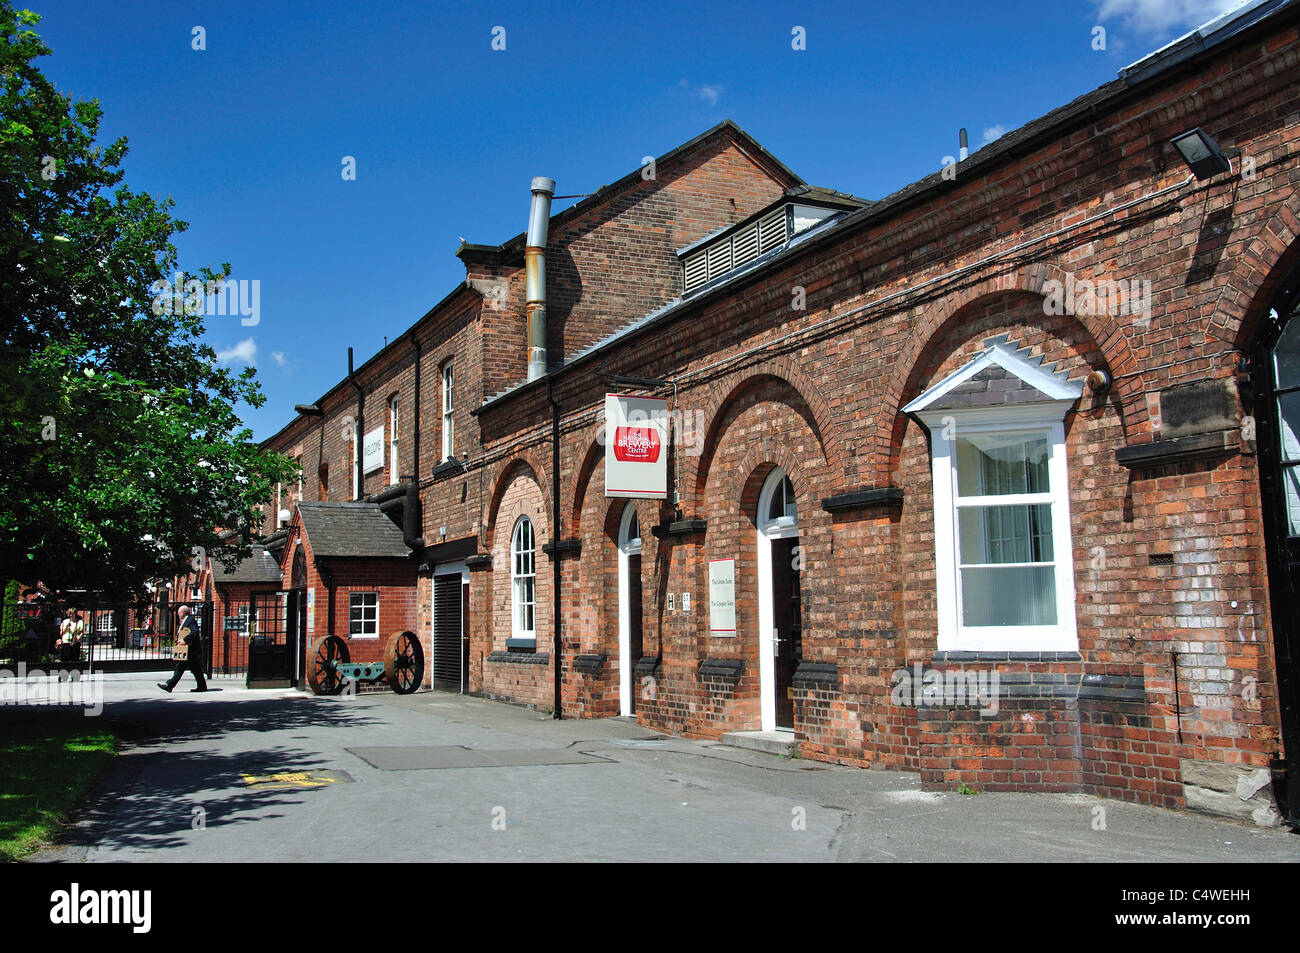 The National Brewery Centre, Horninglow Street, Burton upon Trent, Staffordshire, England, United Kingdom Stock Photo